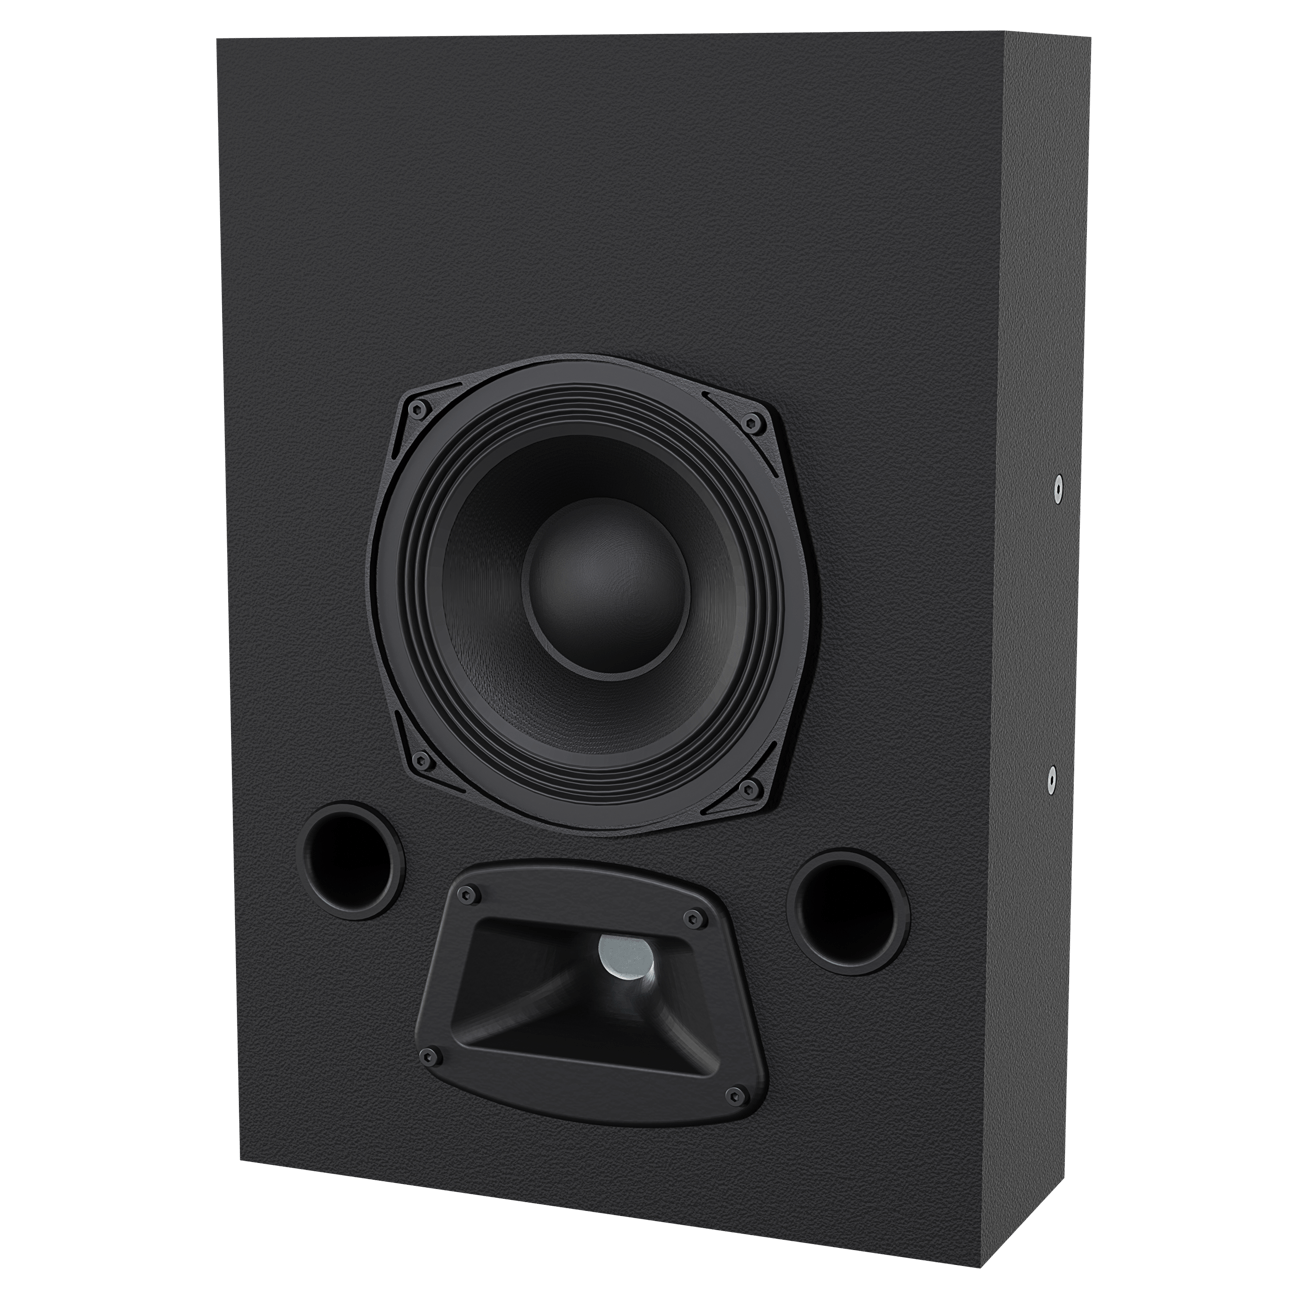 Main view of the MAG Audio Theatron Performance Series S6 speaker